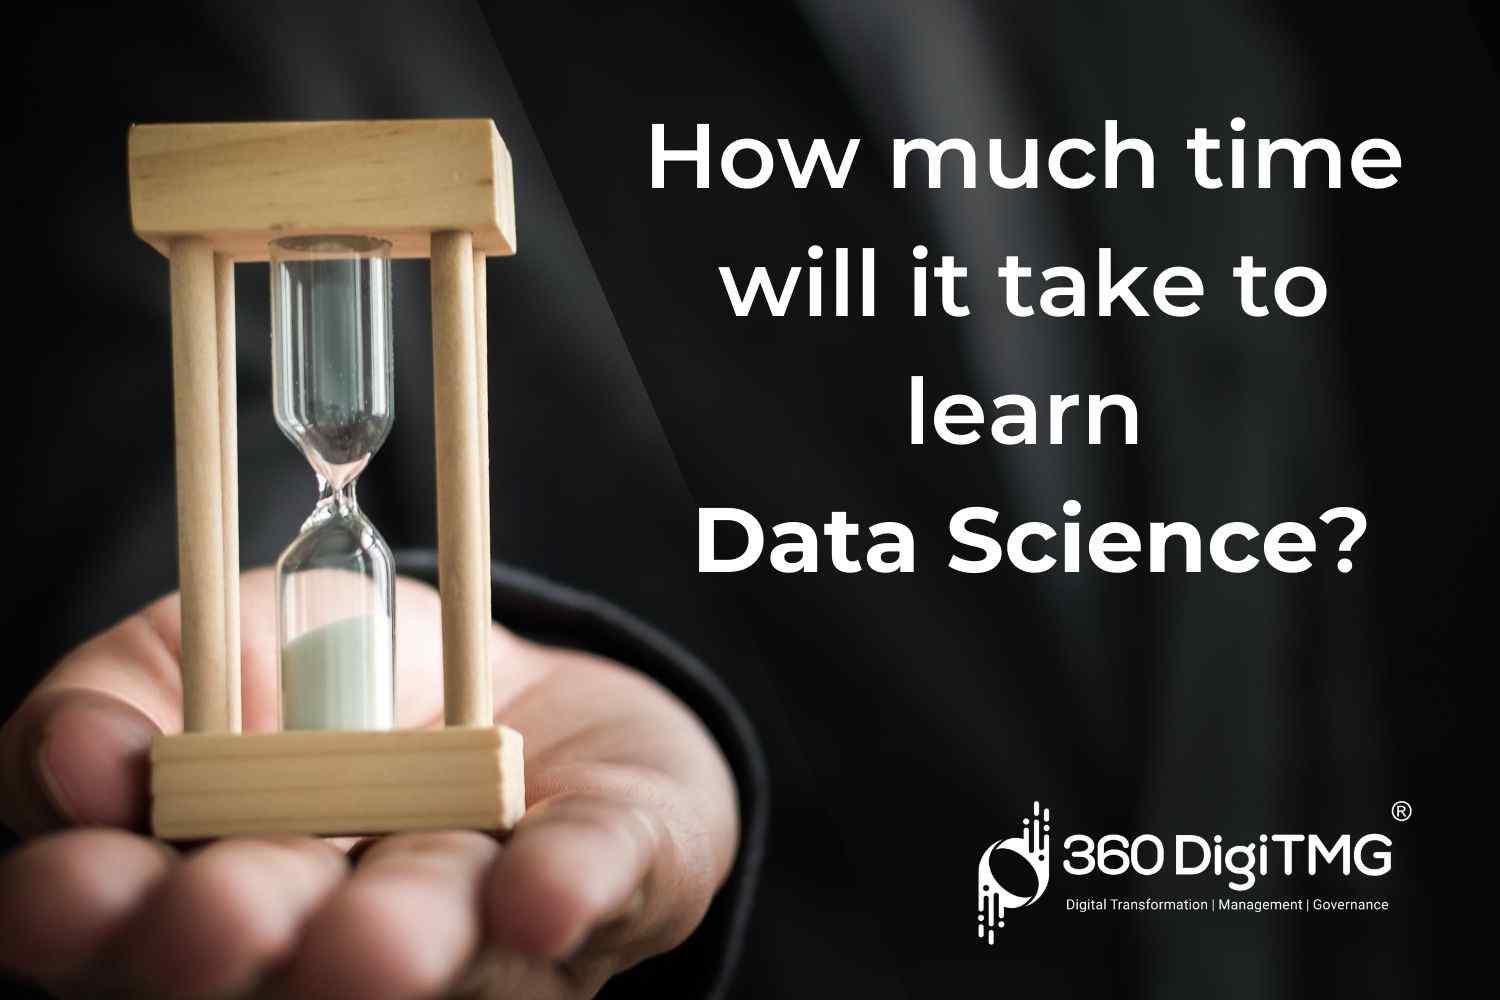 How much time will it take to learn data science?